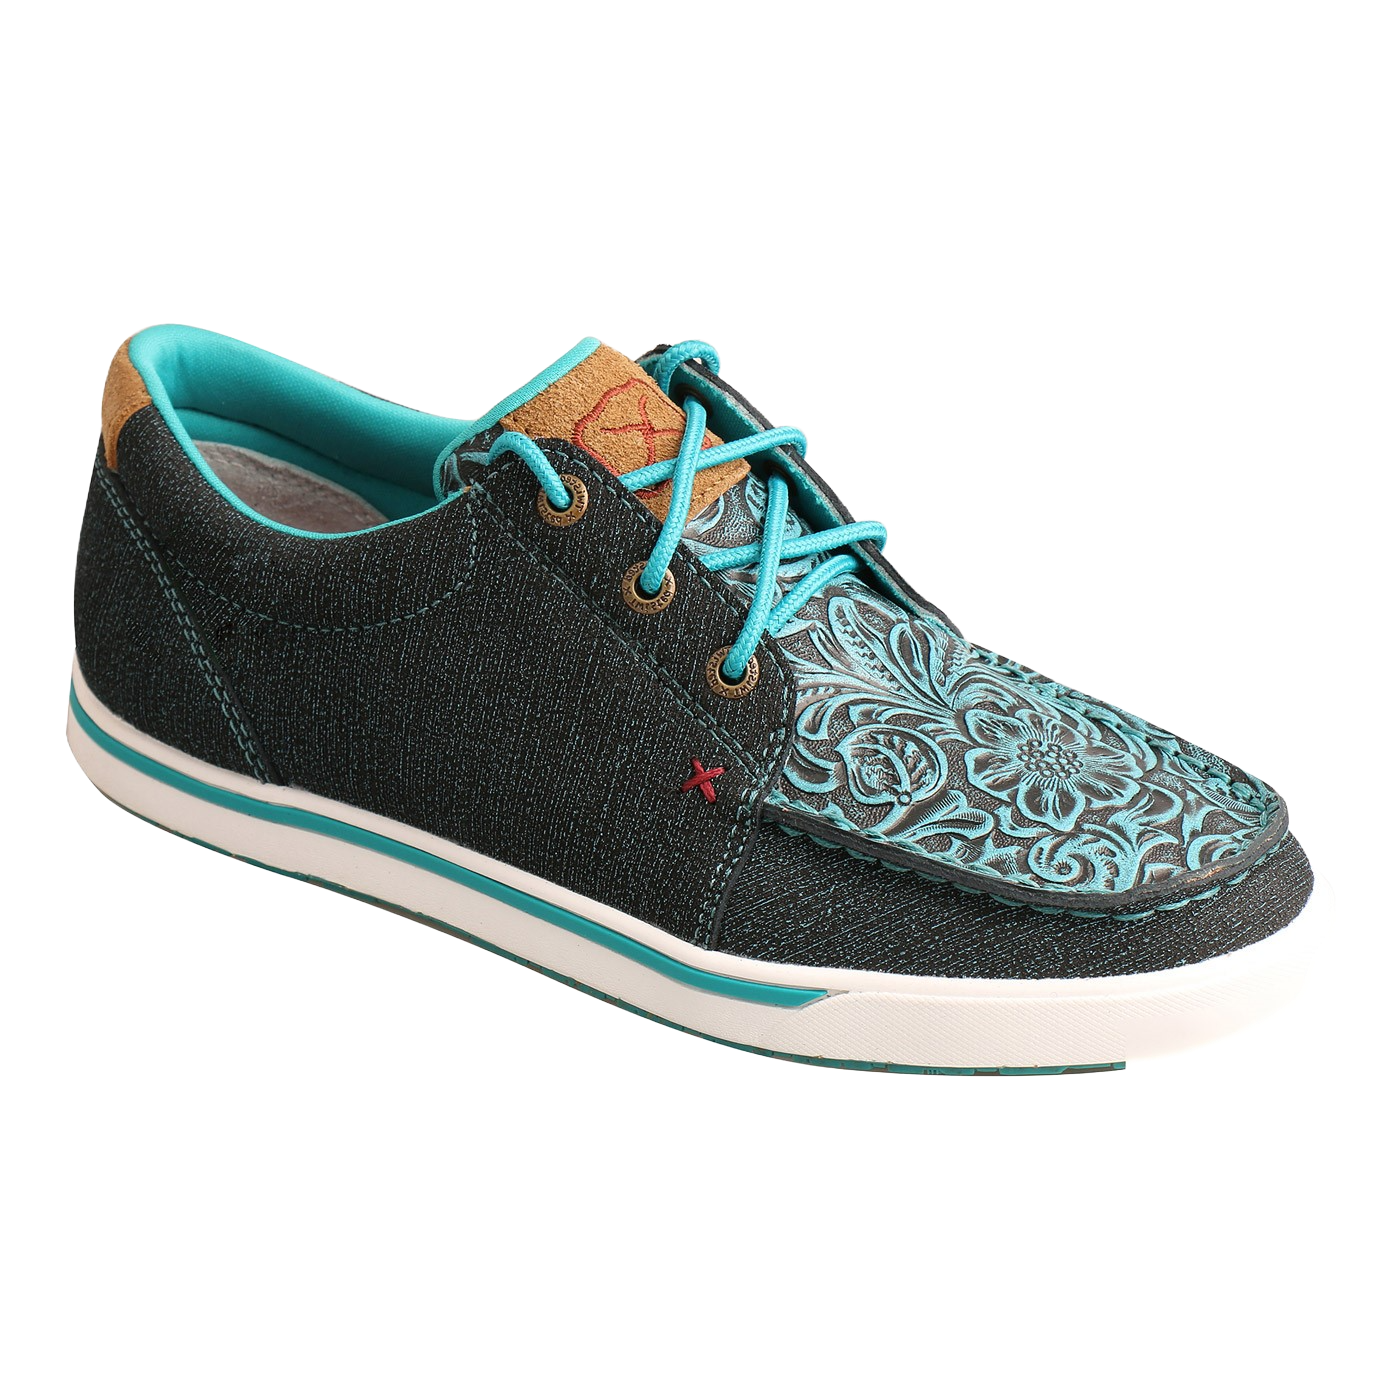 Twisted X Children's Lace Dark Teal & Teal Kick Shoes YCA0011